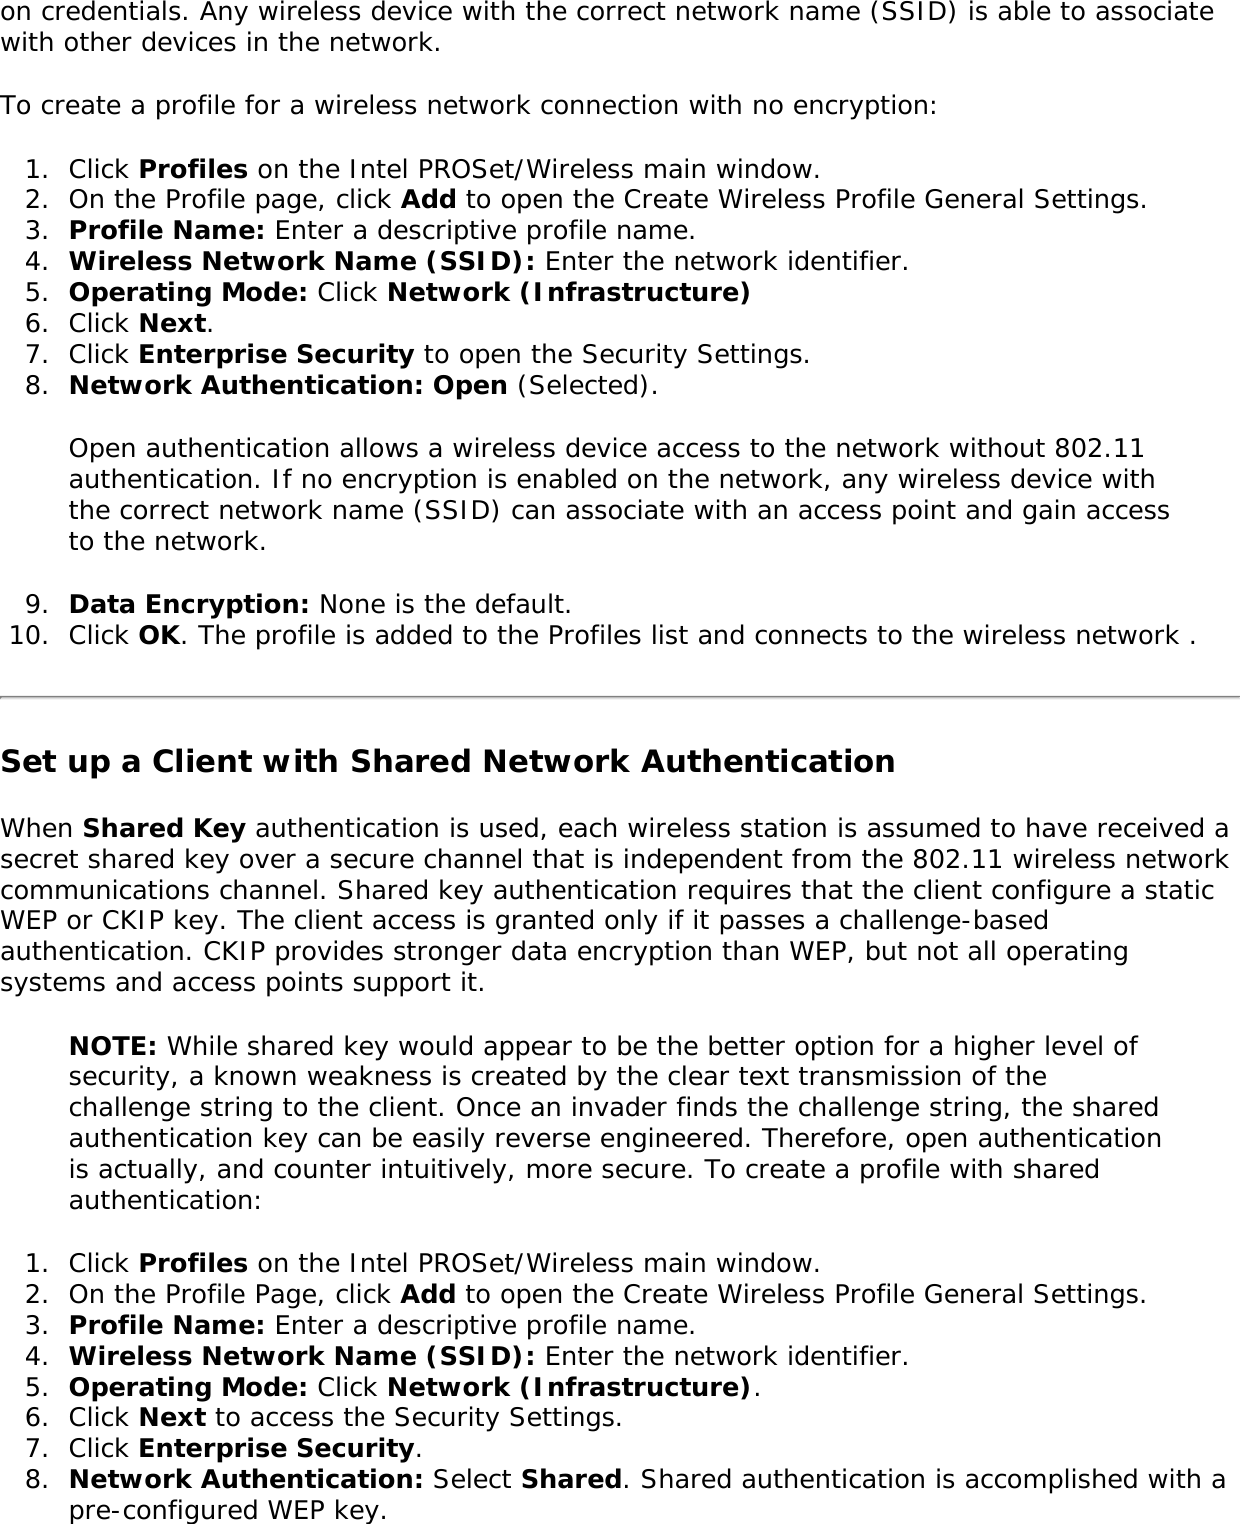 on credentials. Any wireless device with the correct network name (SSID) is able to associate with other devices in the network. To create a profile for a wireless network connection with no encryption: 1.  Click Profiles on the Intel PROSet/Wireless main window. 2.  On the Profile page, click Add to open the Create Wireless Profile General Settings. 3.  Profile Name: Enter a descriptive profile name. 4.  Wireless Network Name (SSID): Enter the network identifier. 5.  Operating Mode: Click Network (Infrastructure)6.  Click Next. 7.  Click Enterprise Security to open the Security Settings. 8.  Network Authentication: Open (Selected). Open authentication allows a wireless device access to the network without 802.11 authentication. If no encryption is enabled on the network, any wireless device with the correct network name (SSID) can associate with an access point and gain access to the network. 9.  Data Encryption: None is the default. 10.  Click OK. The profile is added to the Profiles list and connects to the wireless network . Set up a Client with Shared Network AuthenticationWhen Shared Key authentication is used, each wireless station is assumed to have received a secret shared key over a secure channel that is independent from the 802.11 wireless network communications channel. Shared key authentication requires that the client configure a static WEP or CKIP key. The client access is granted only if it passes a challenge-based authentication. CKIP provides stronger data encryption than WEP, but not all operating systems and access points support it. NOTE: While shared key would appear to be the better option for a higher level of security, a known weakness is created by the clear text transmission of the challenge string to the client. Once an invader finds the challenge string, the shared authentication key can be easily reverse engineered. Therefore, open authentication is actually, and counter intuitively, more secure. To create a profile with shared authentication: 1.  Click Profiles on the Intel PROSet/Wireless main window. 2.  On the Profile Page, click Add to open the Create Wireless Profile General Settings.3.  Profile Name: Enter a descriptive profile name.4.  Wireless Network Name (SSID): Enter the network identifier. 5.  Operating Mode: Click Network (Infrastructure). 6.  Click Next to access the Security Settings. 7.  Click Enterprise Security. 8.  Network Authentication: Select Shared. Shared authentication is accomplished with a pre-configured WEP key. 